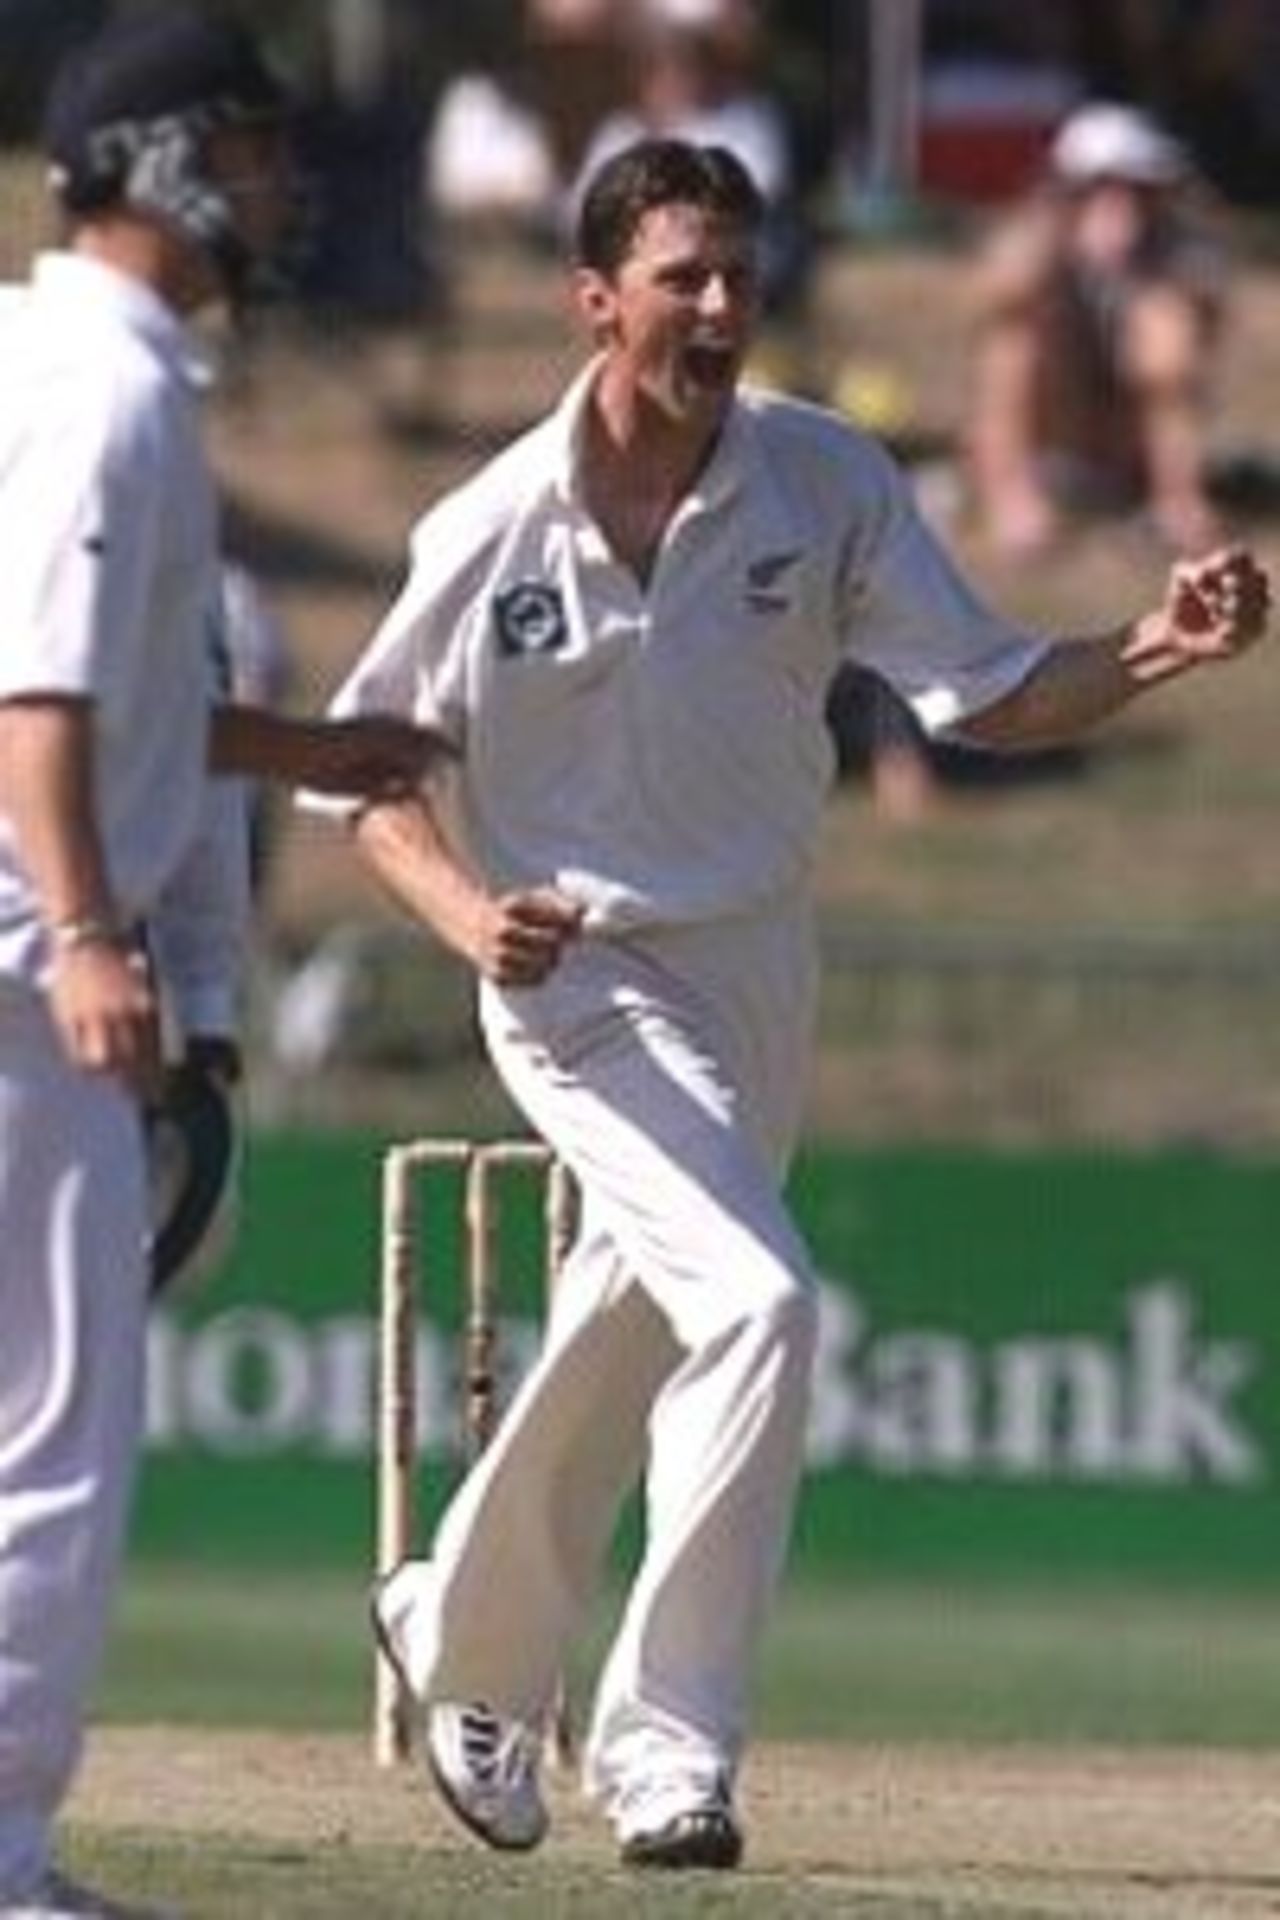 1 Apr 2000: Shayne O'Connor of New Zealand celebrates after trapping Michael Slater of Australia LBW, during day two of the third test between New Zealand and Australia, at WestpacTrust Park, Hamilton, New Zealand.